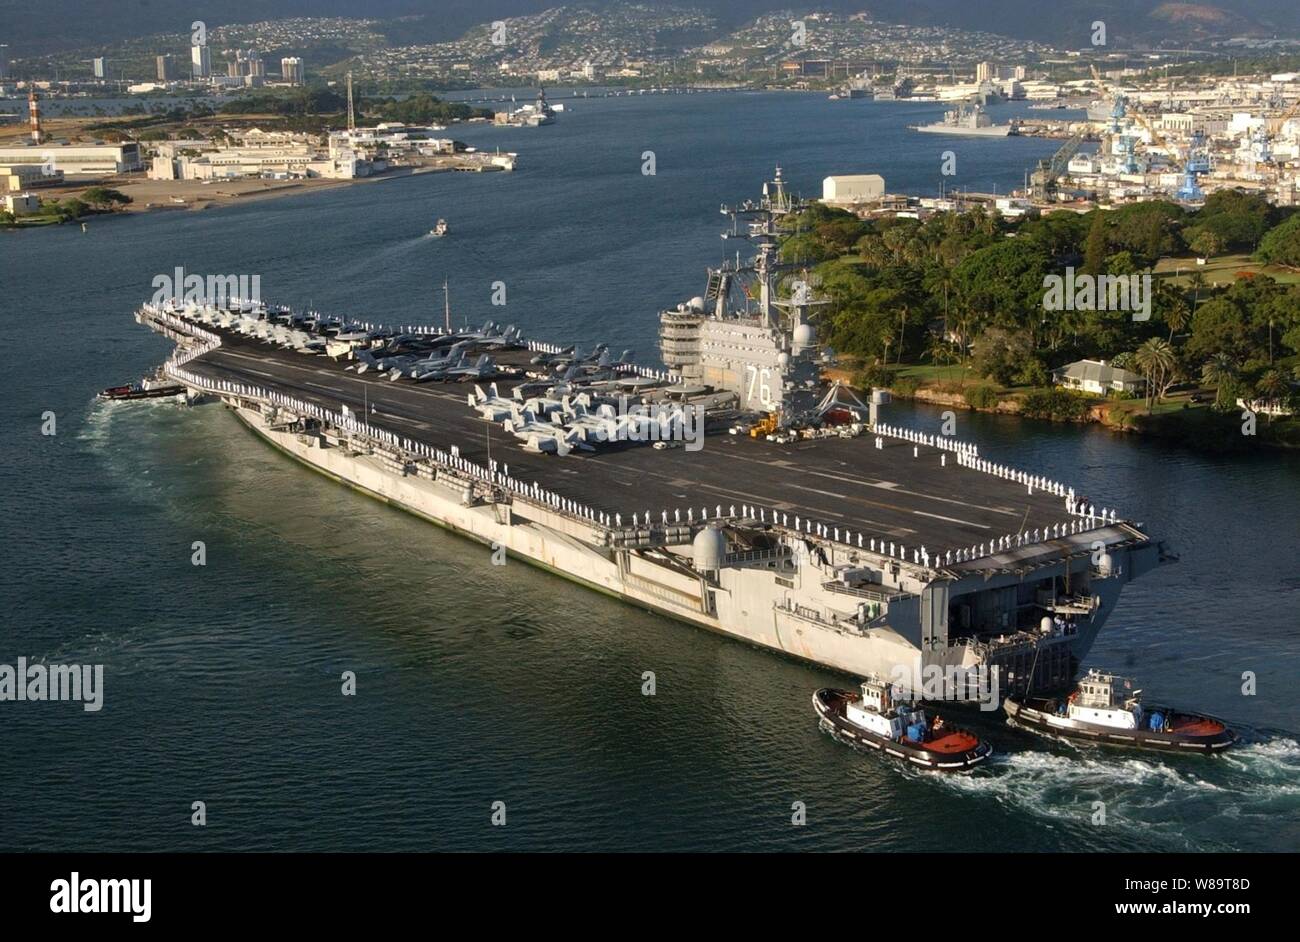 The aircraft carrier USS Ronald Reagan (CVN 76) is aided by harbor tugs as it enters Pearl Harbor, Hawaii, for a port visit on June 28, 2006.  Reagan and embarked Carrier Air Wing 14 are on a regularly scheduled deployment conducting maritime security operations. Stock Photo